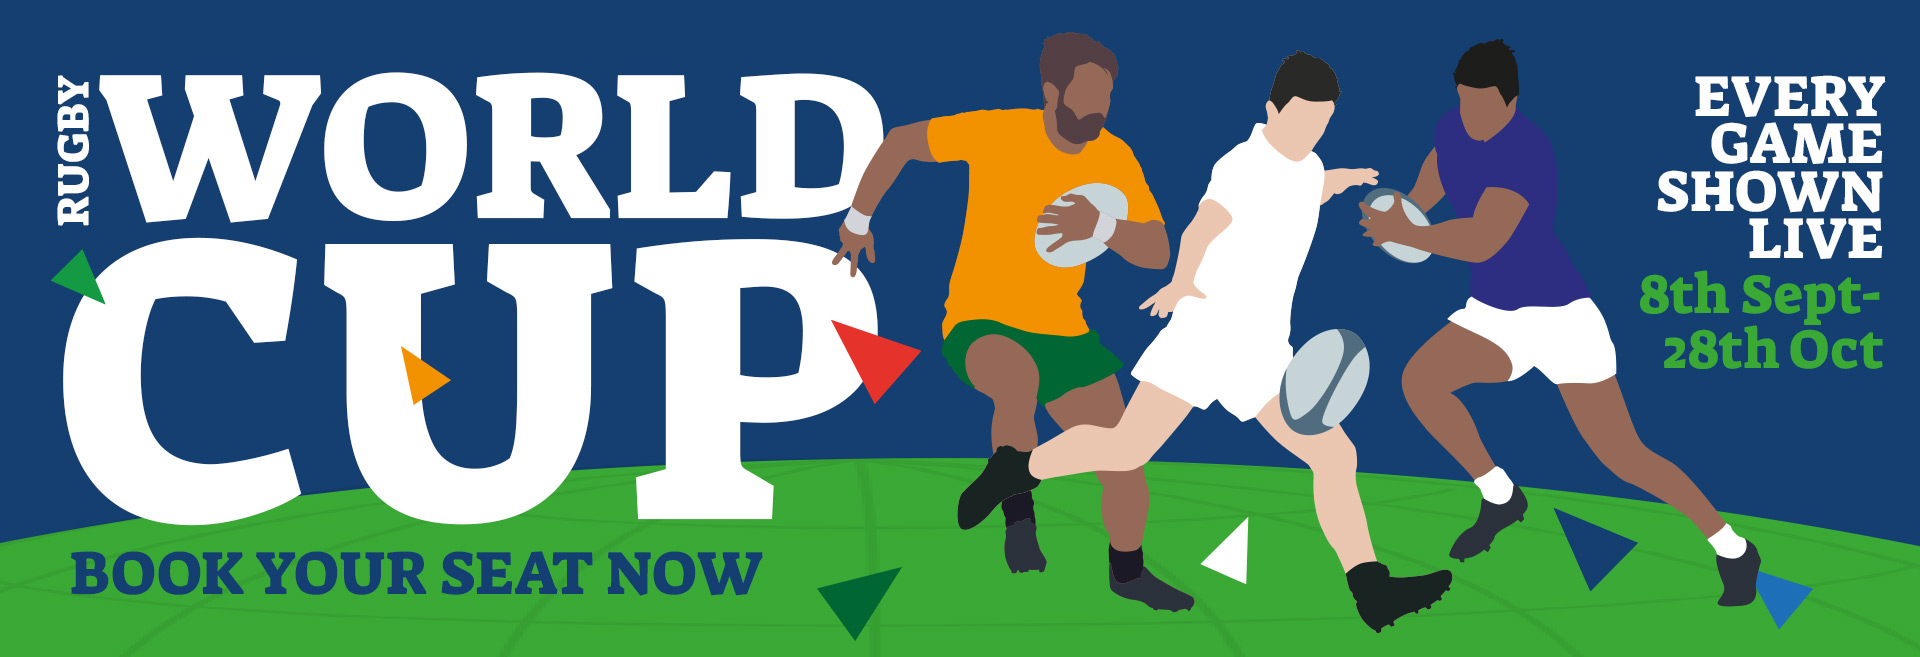 Watch the Rugby World Cup at The Royal Standard